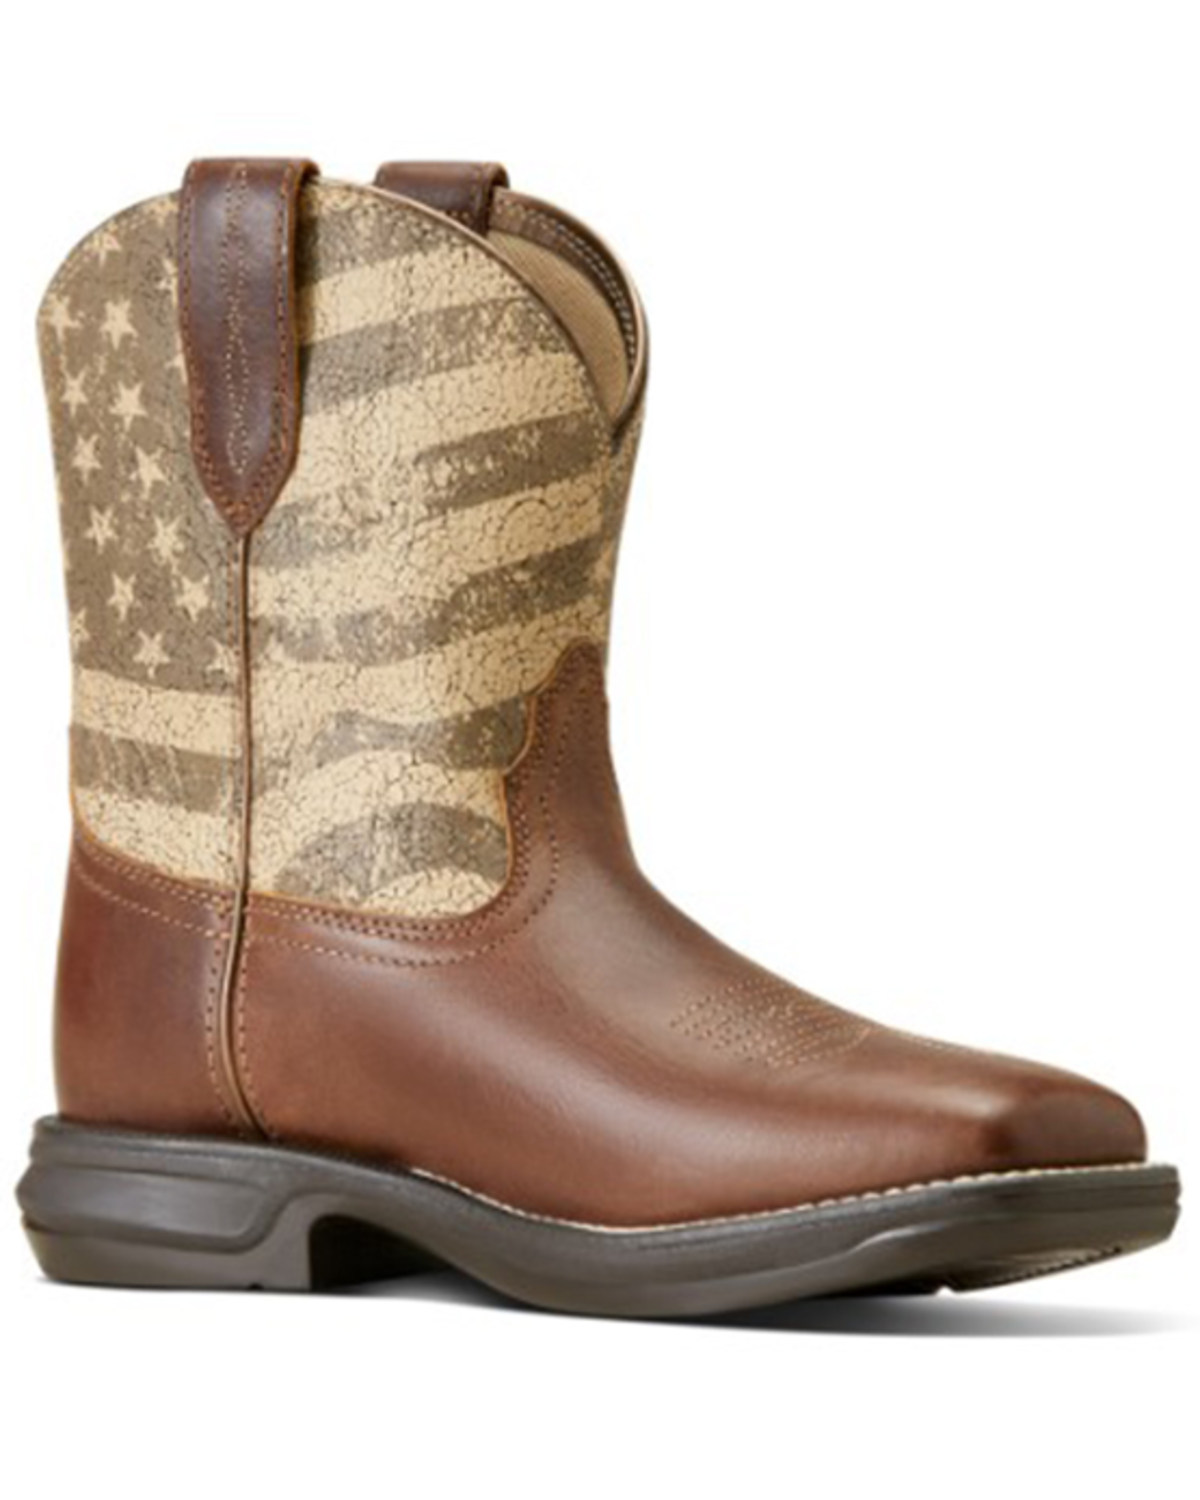 Ariat Women's Anthem Shortie Western Boots - Square Toe